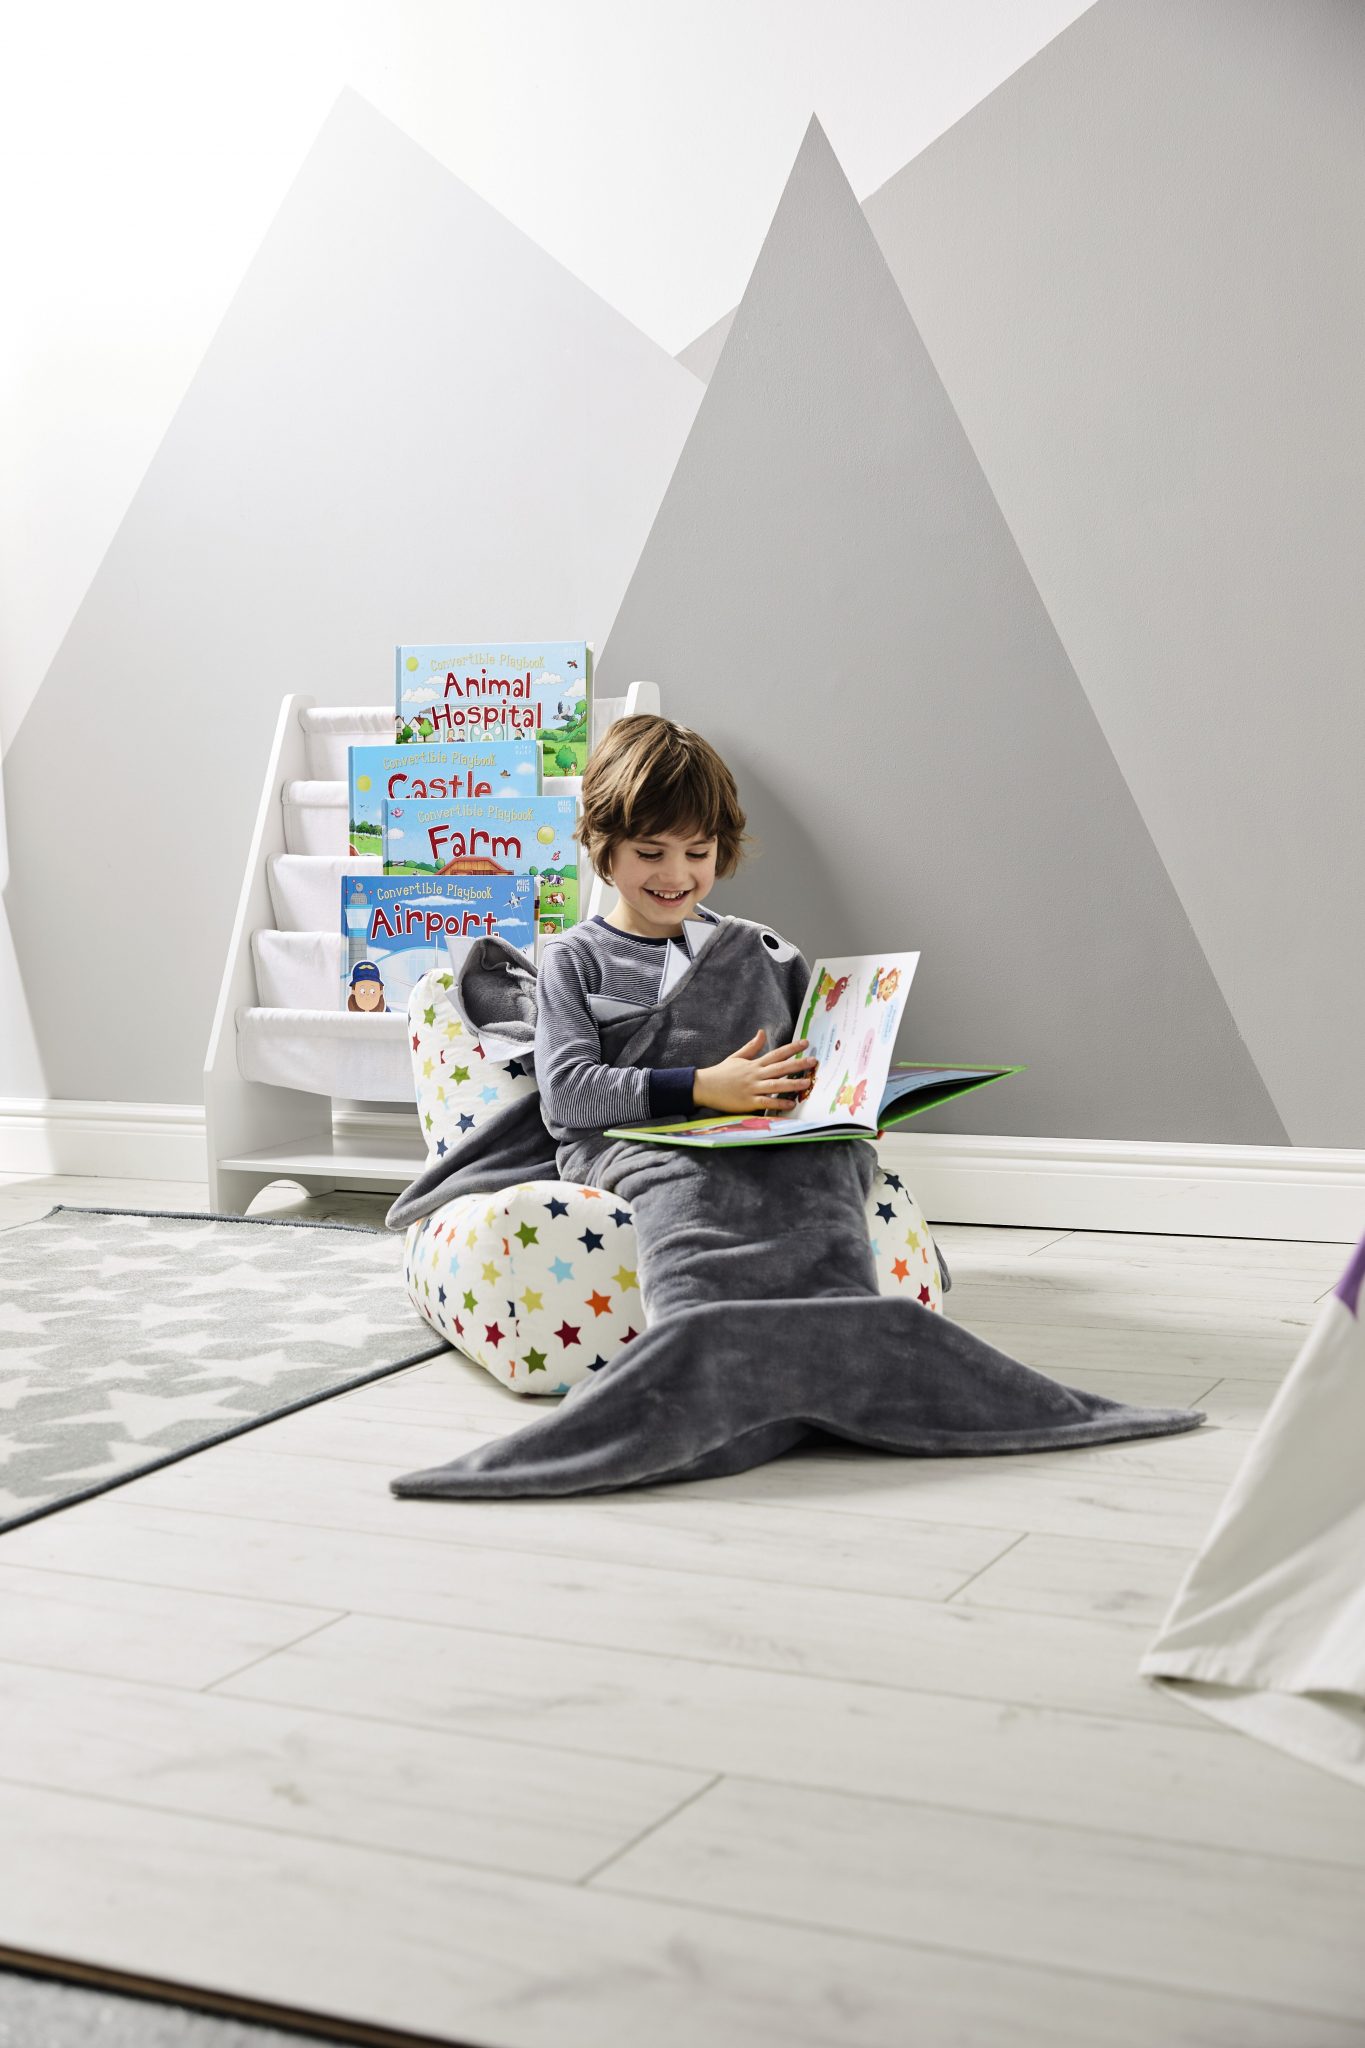 Aldi’s latest range will see your child’s room kitted out in some serious style